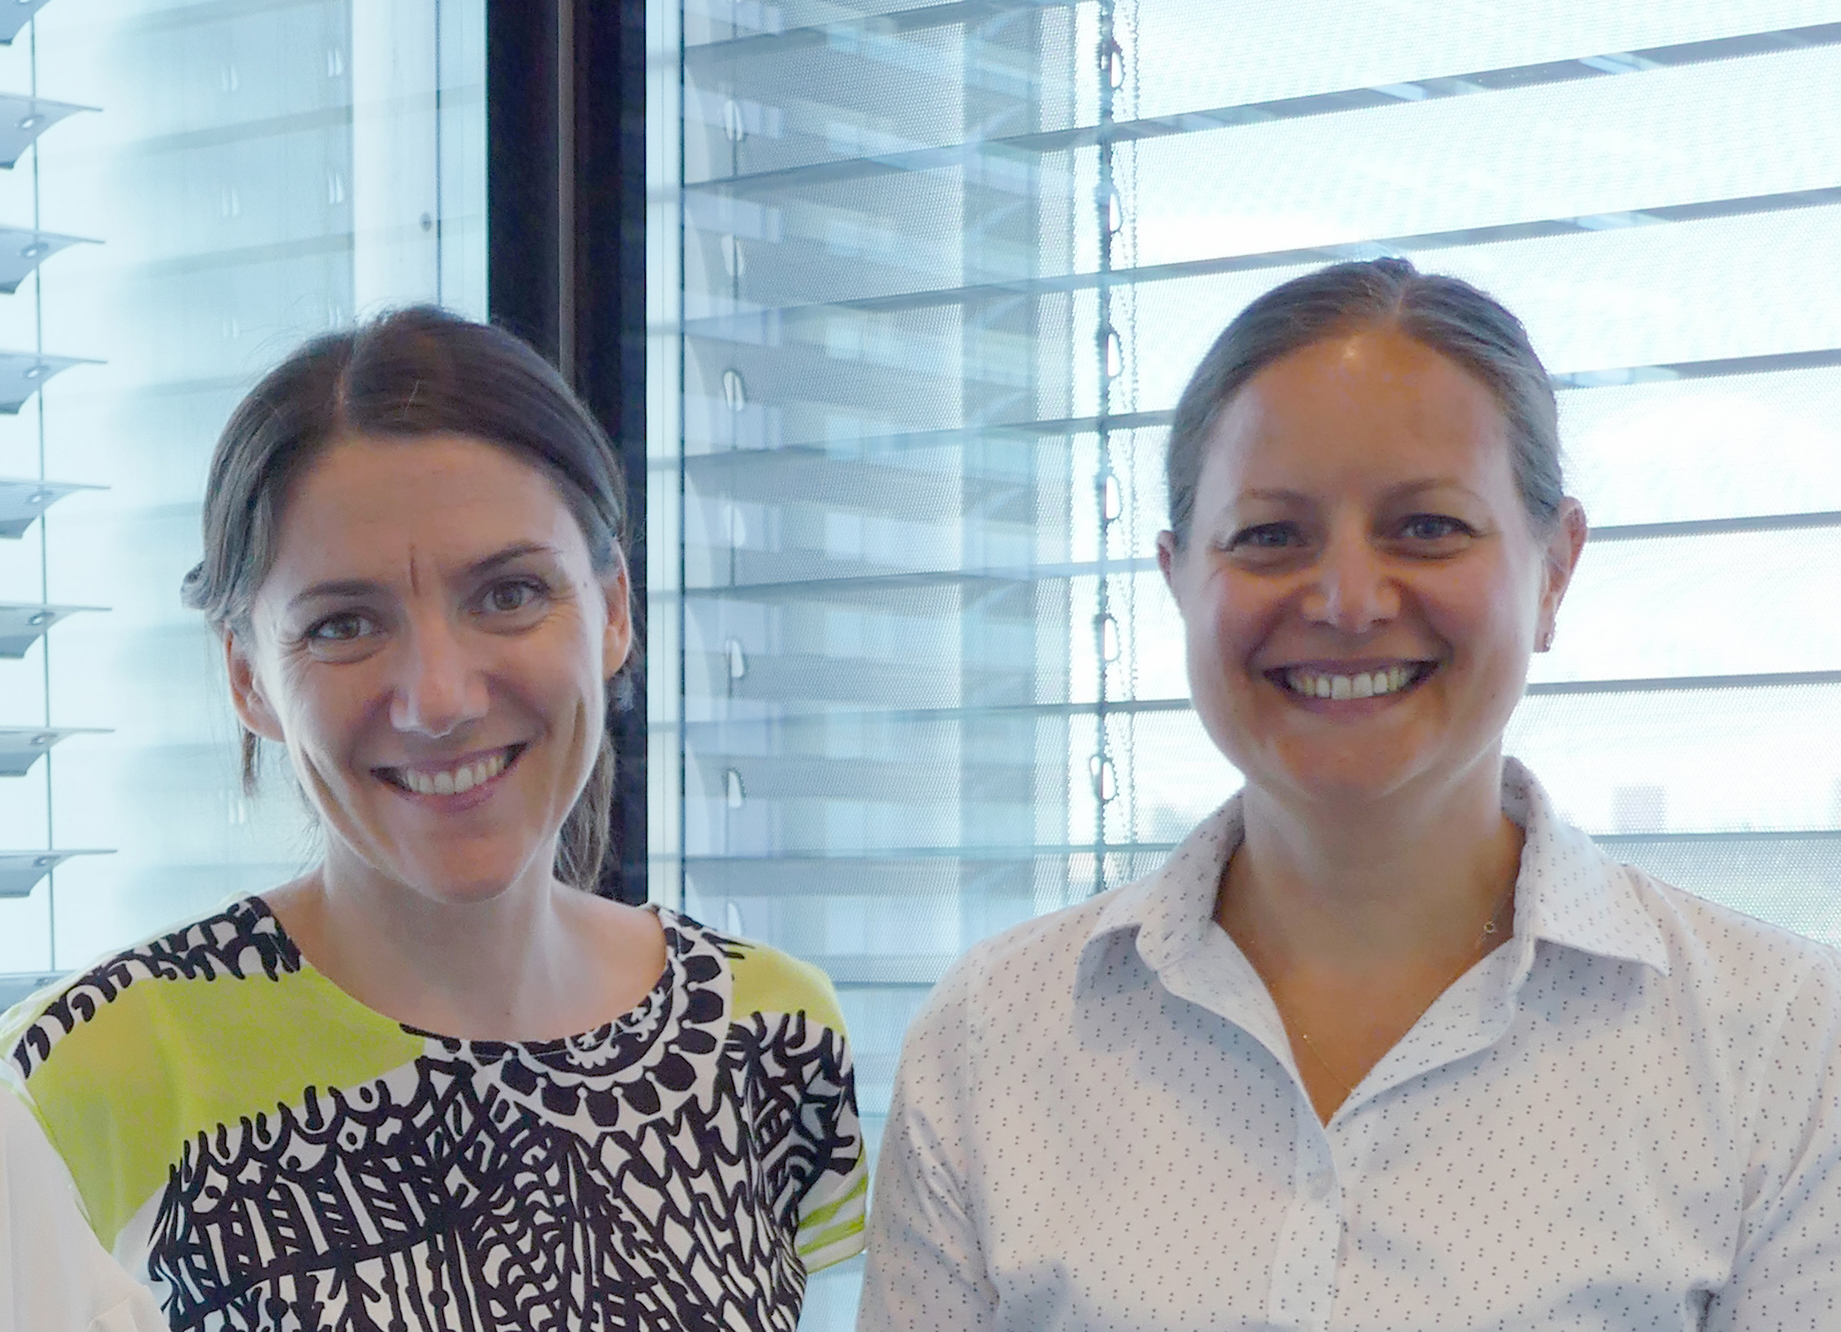 Nathalie Percie du Sert and Esther Pearl, the NC3Rs part of the EDA development team